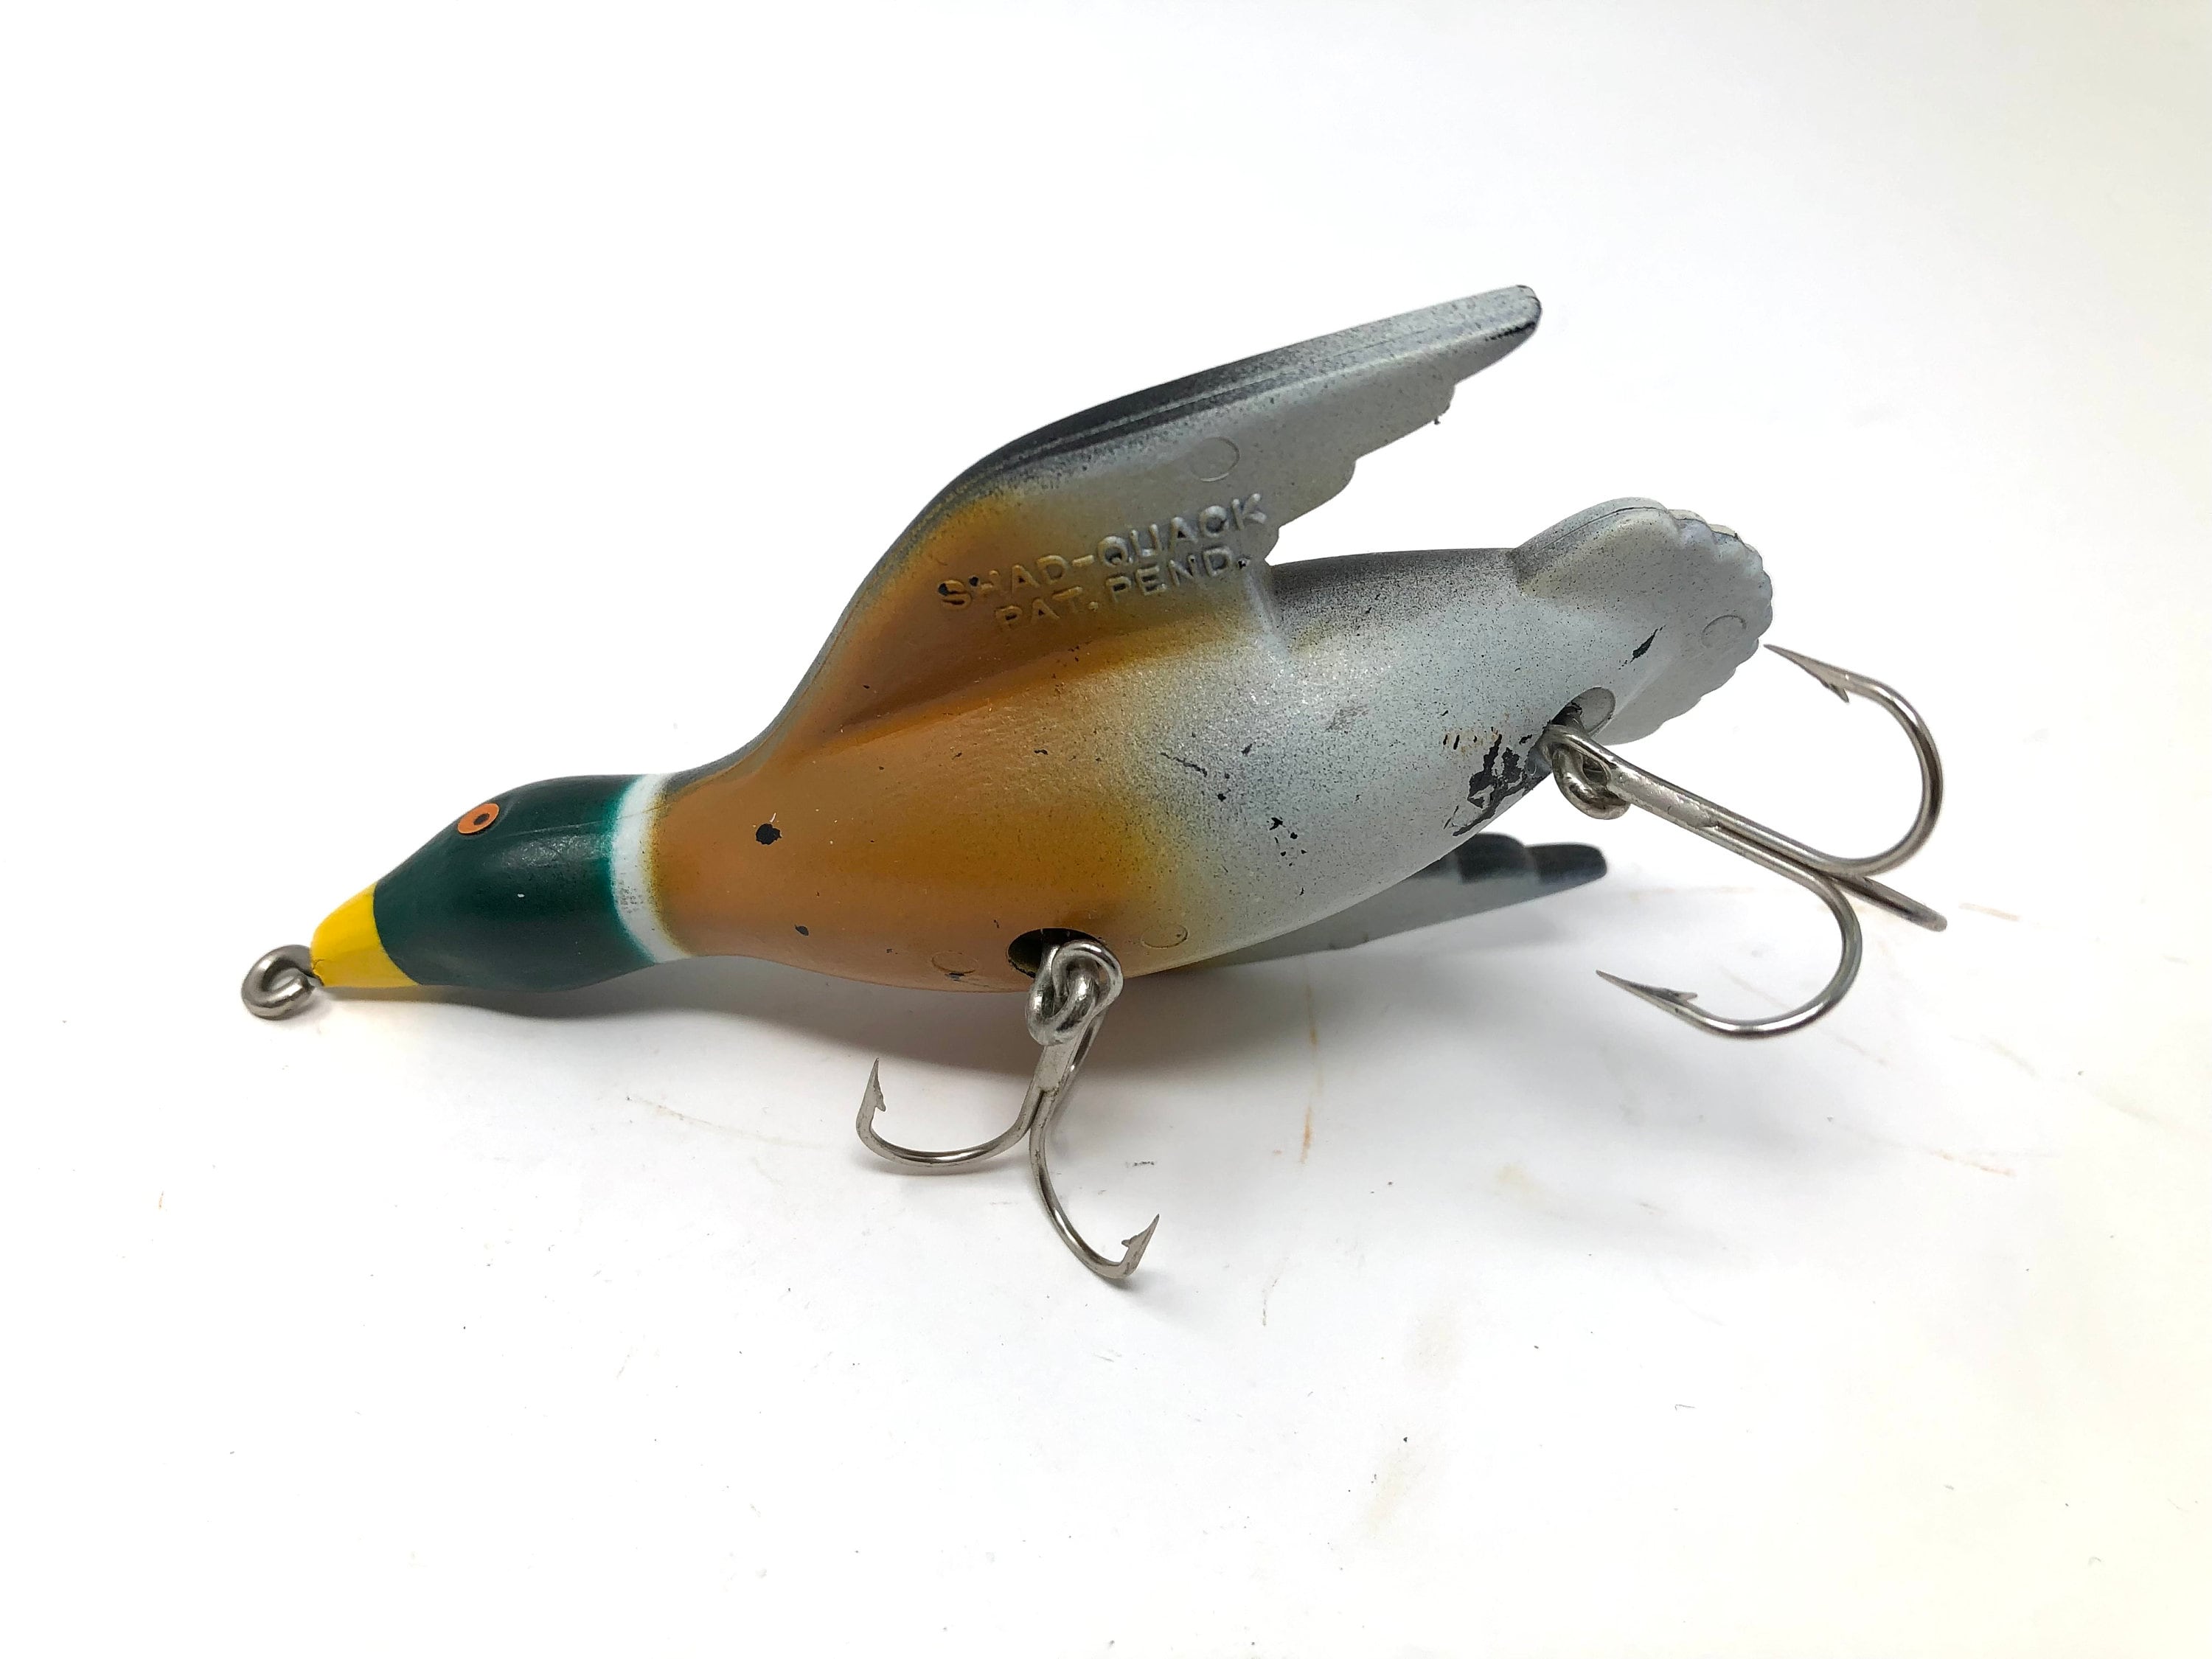 Vintage Heddon 9630 Punkinseed Crappie Fishing Lure / Antique